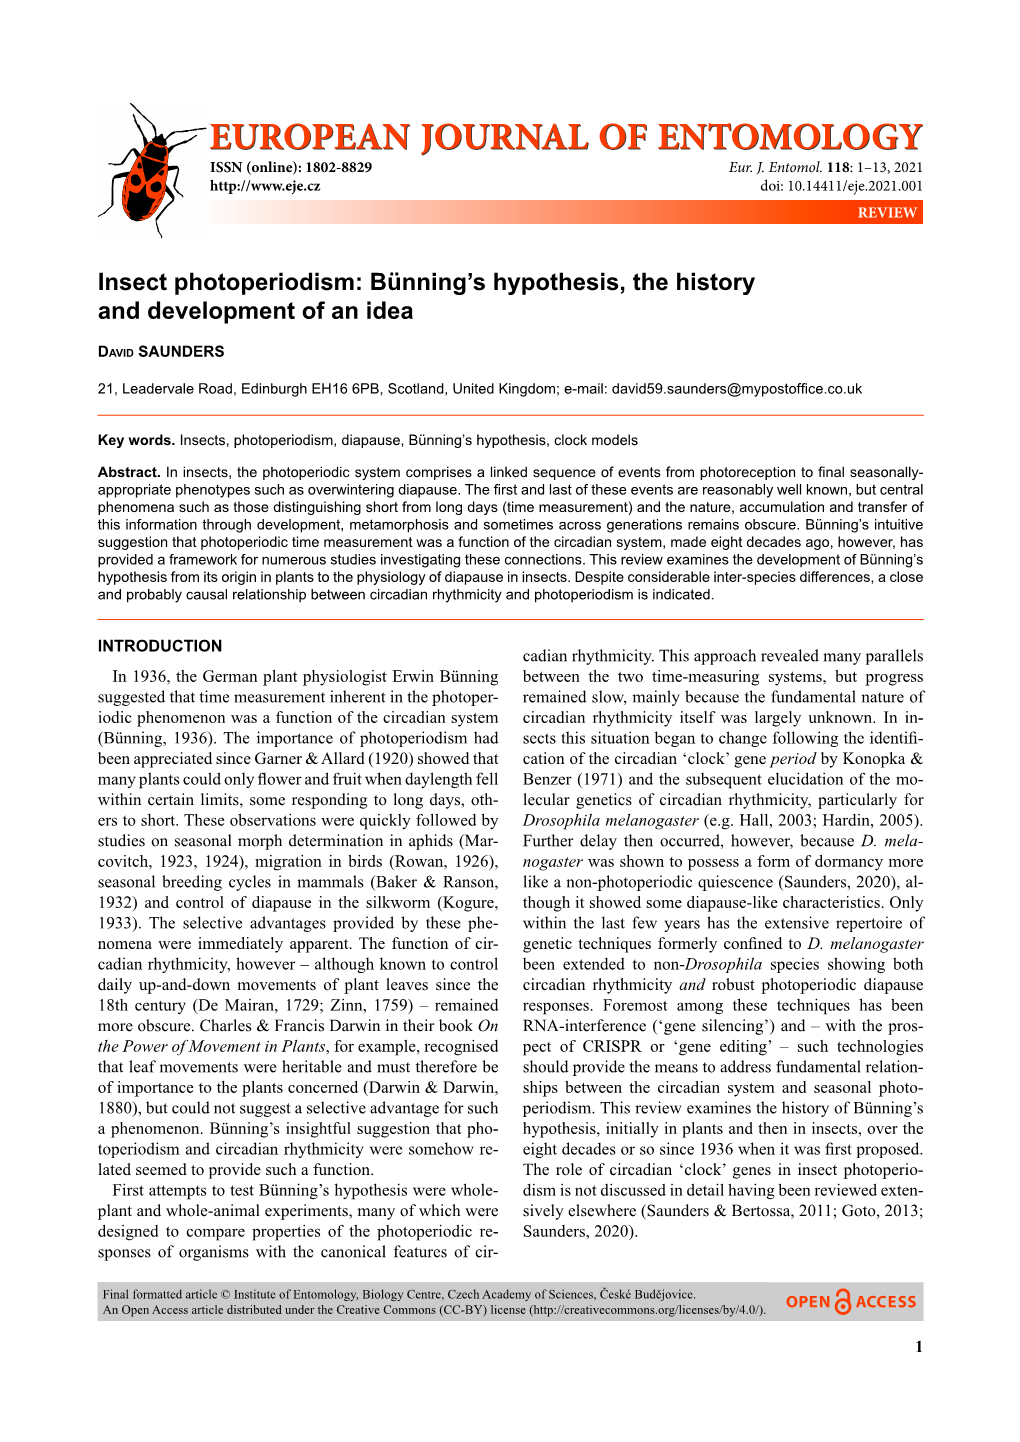 Insect Photoperiodism: Bünning’S Hypothesis, the History and Development of an Idea